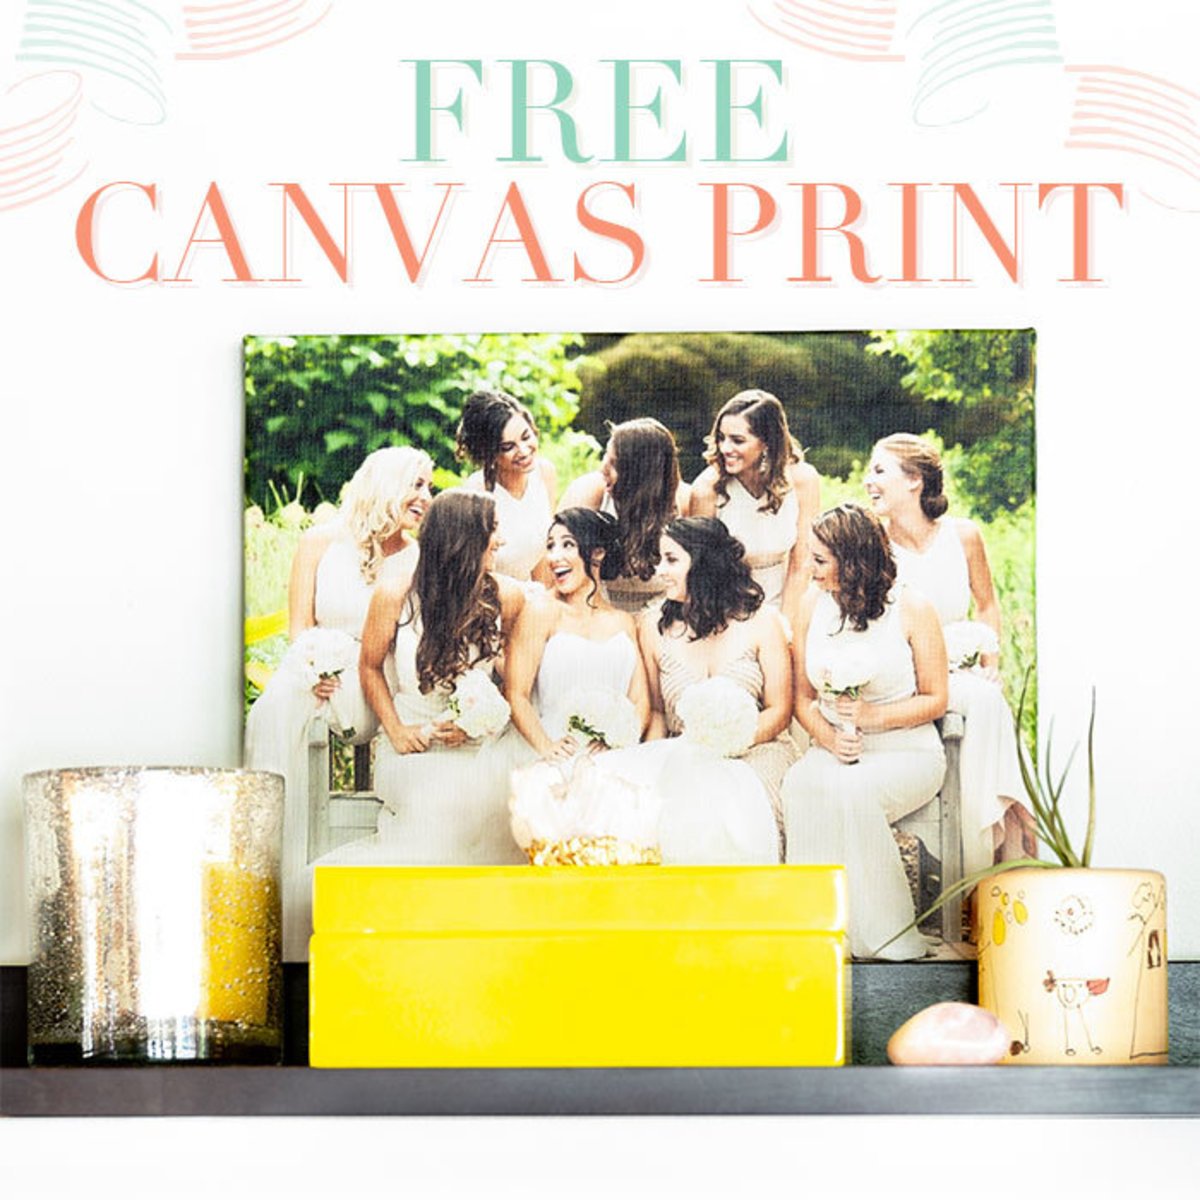 Get a Free Canvas Print When You Upload an Approved Image